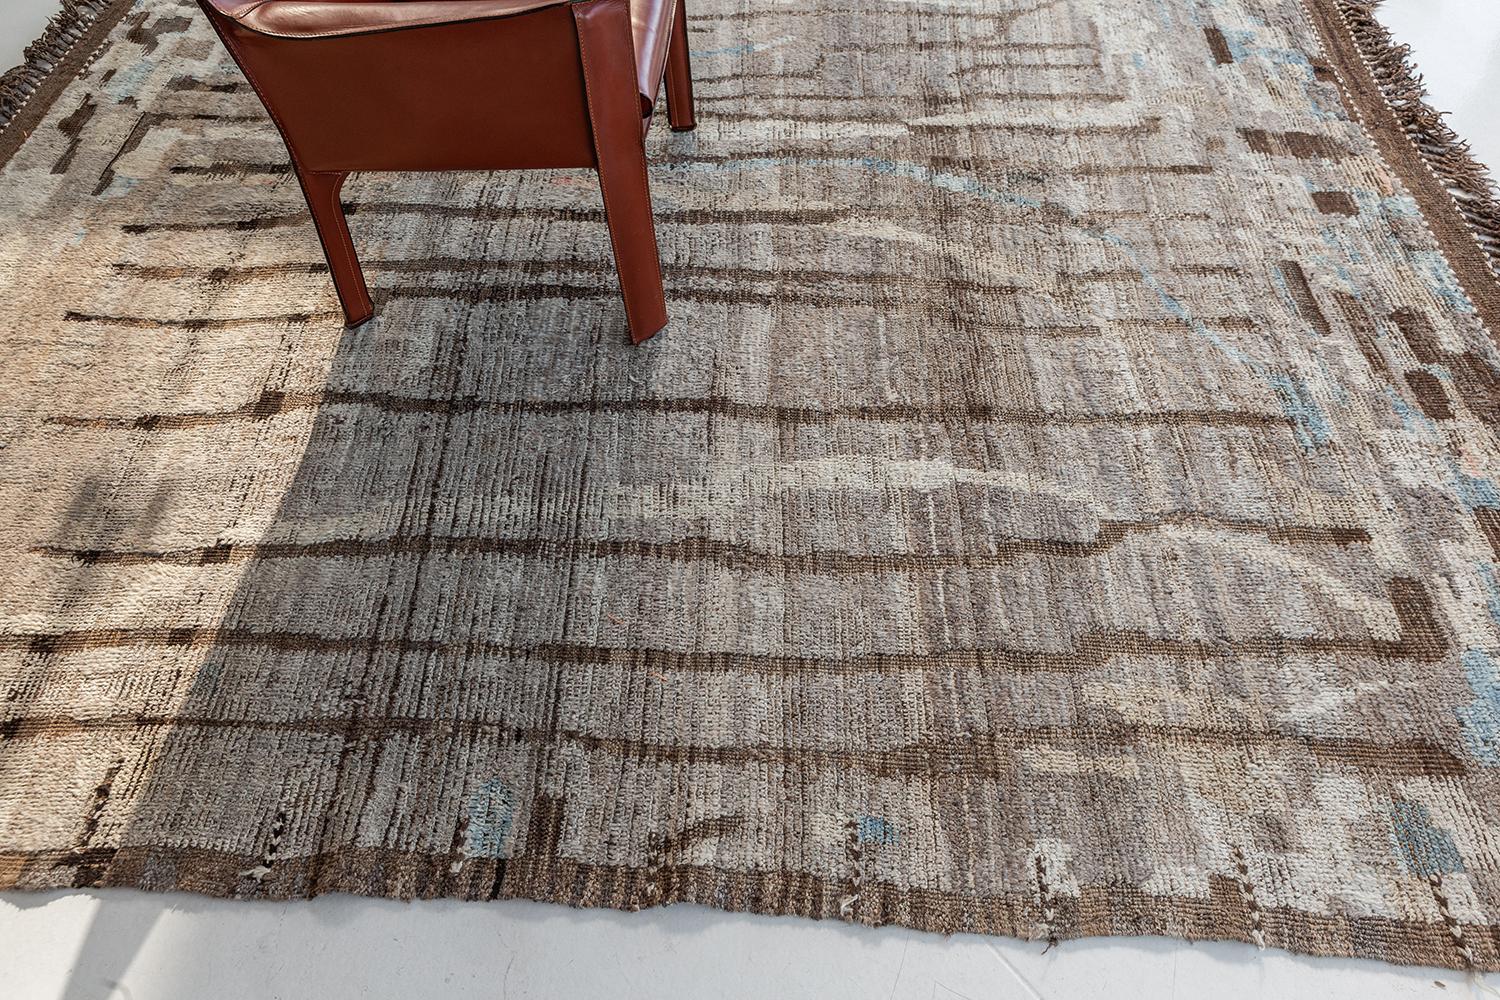 'Berberis' is an interplay between natural earth tones and cool colors into a modern day interpretation of the Moroccan world. This rug's play of textures, linework, and unique shapes is what makes the Atlas collection so unique and sought after.